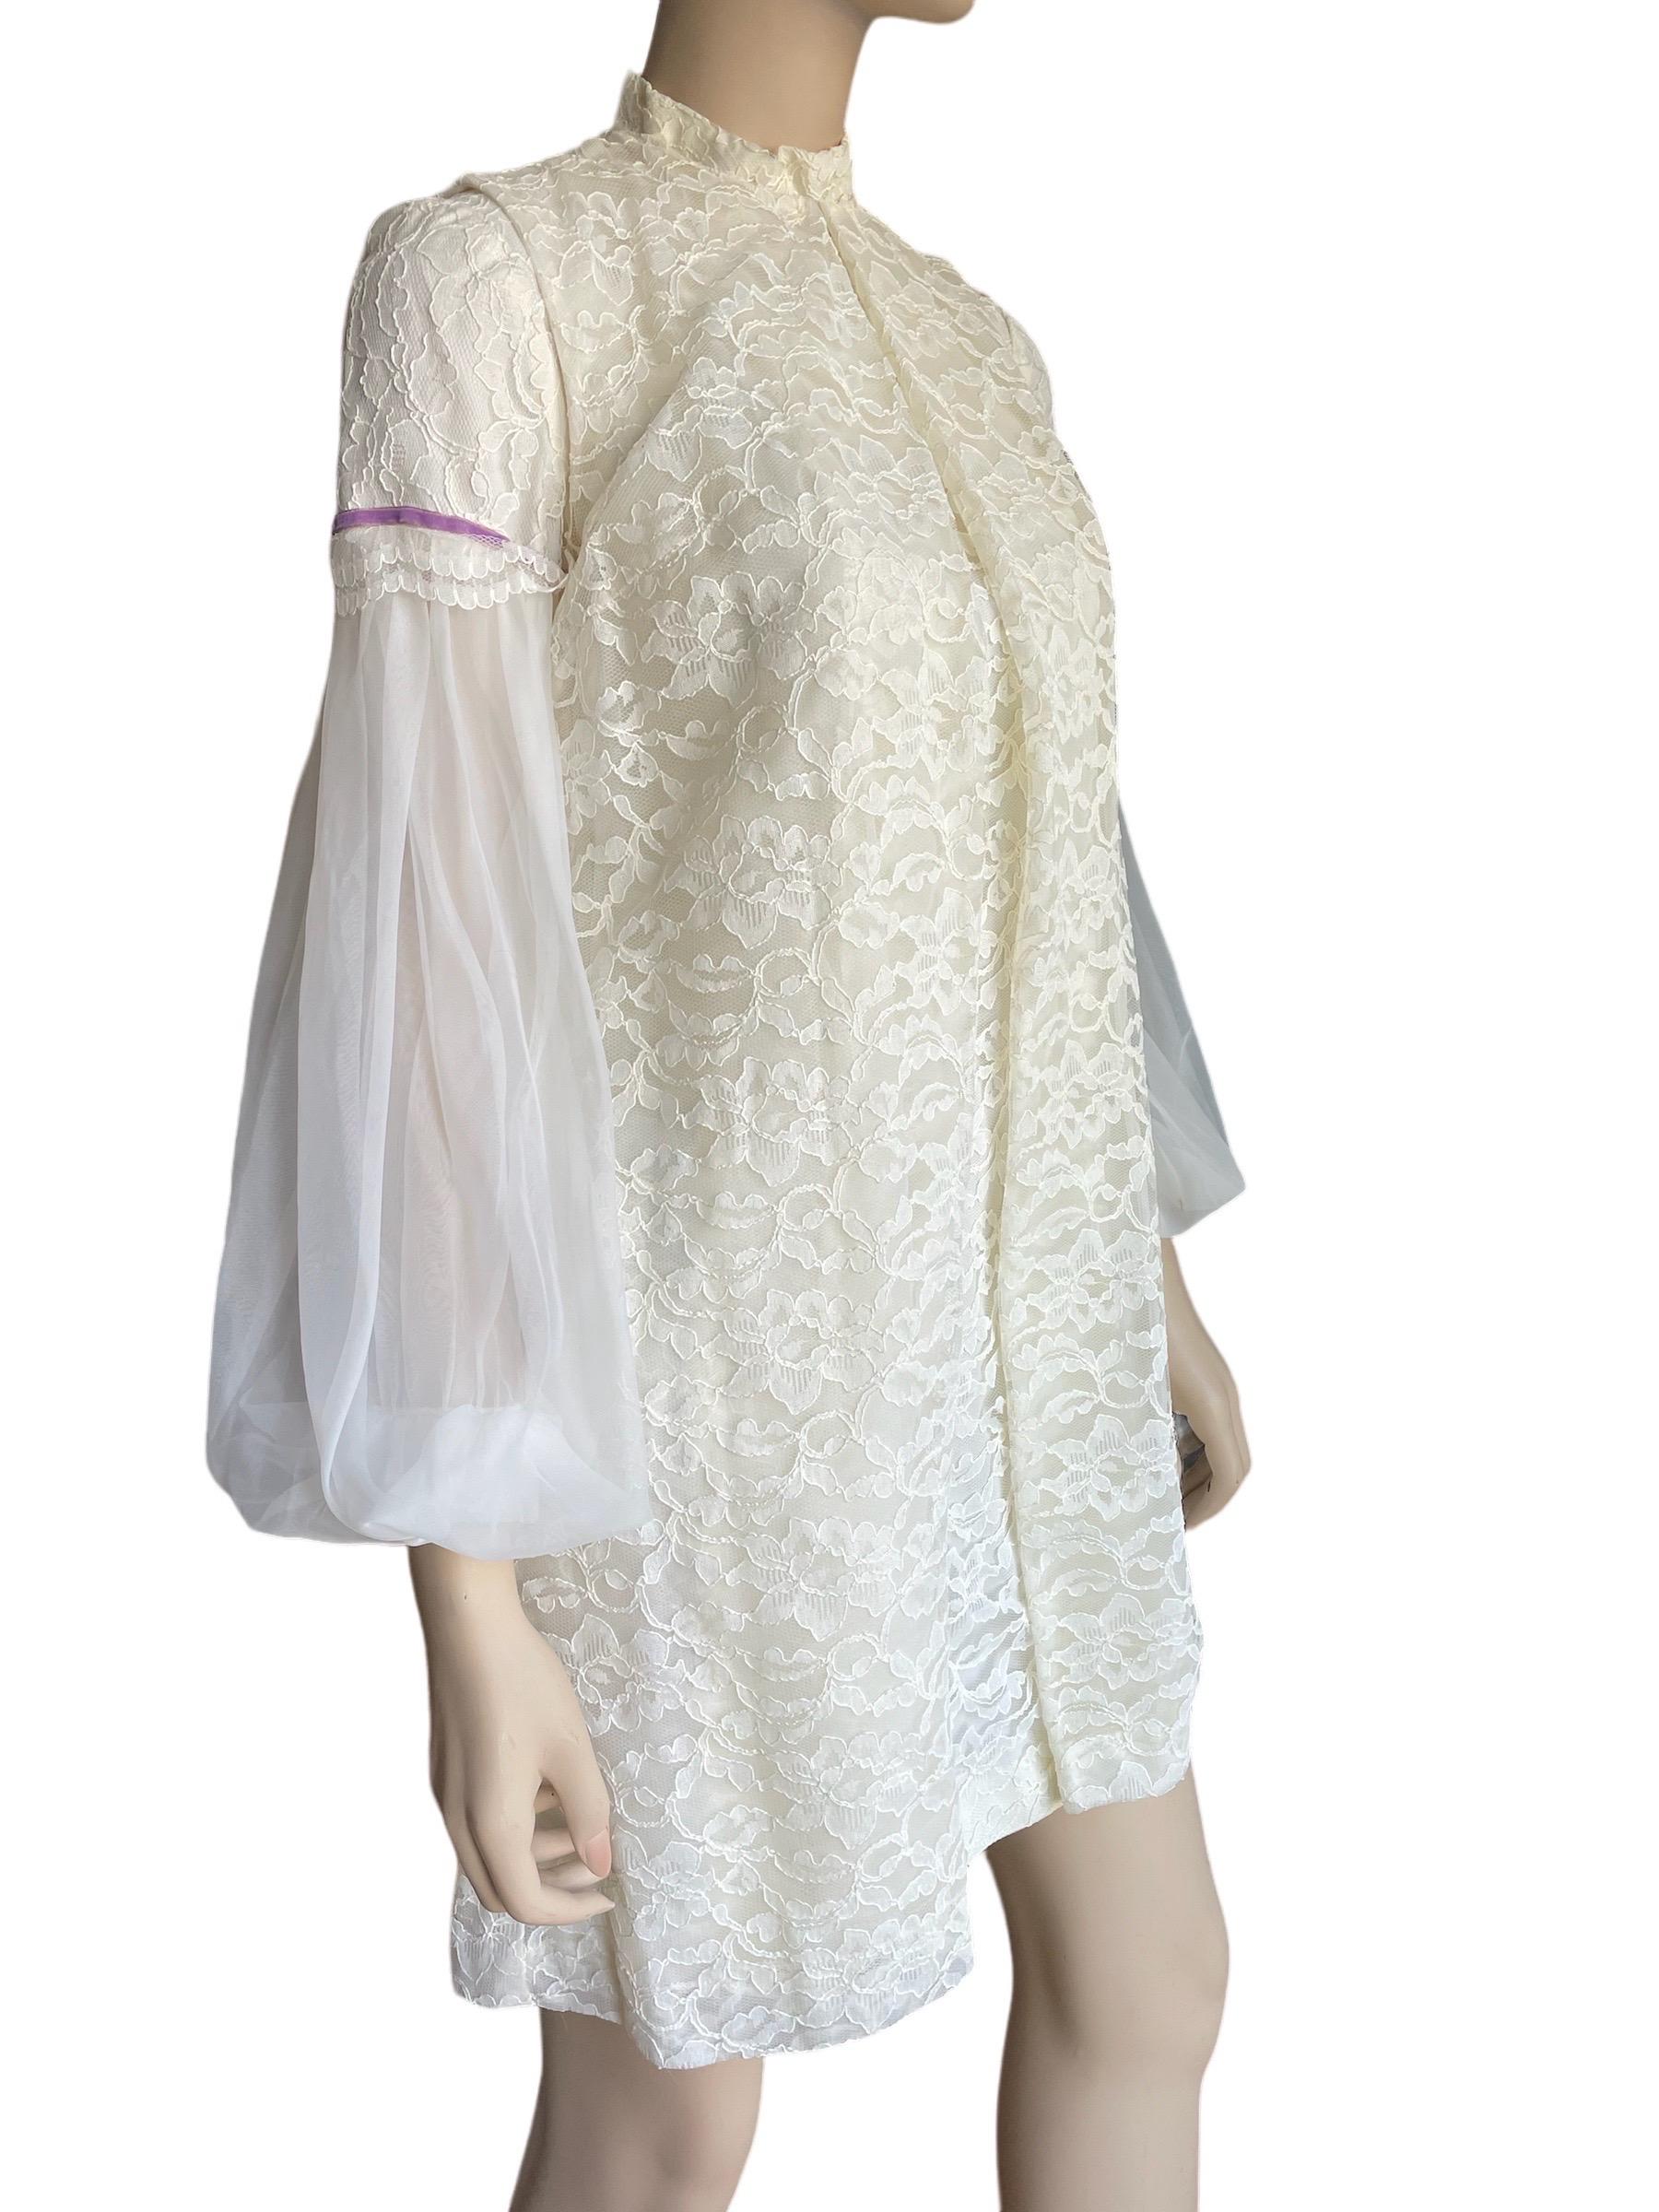 1960s Cream Lace Mini Dress with Bishop Sleeves and Vest  In Good Condition For Sale In Greenport, NY